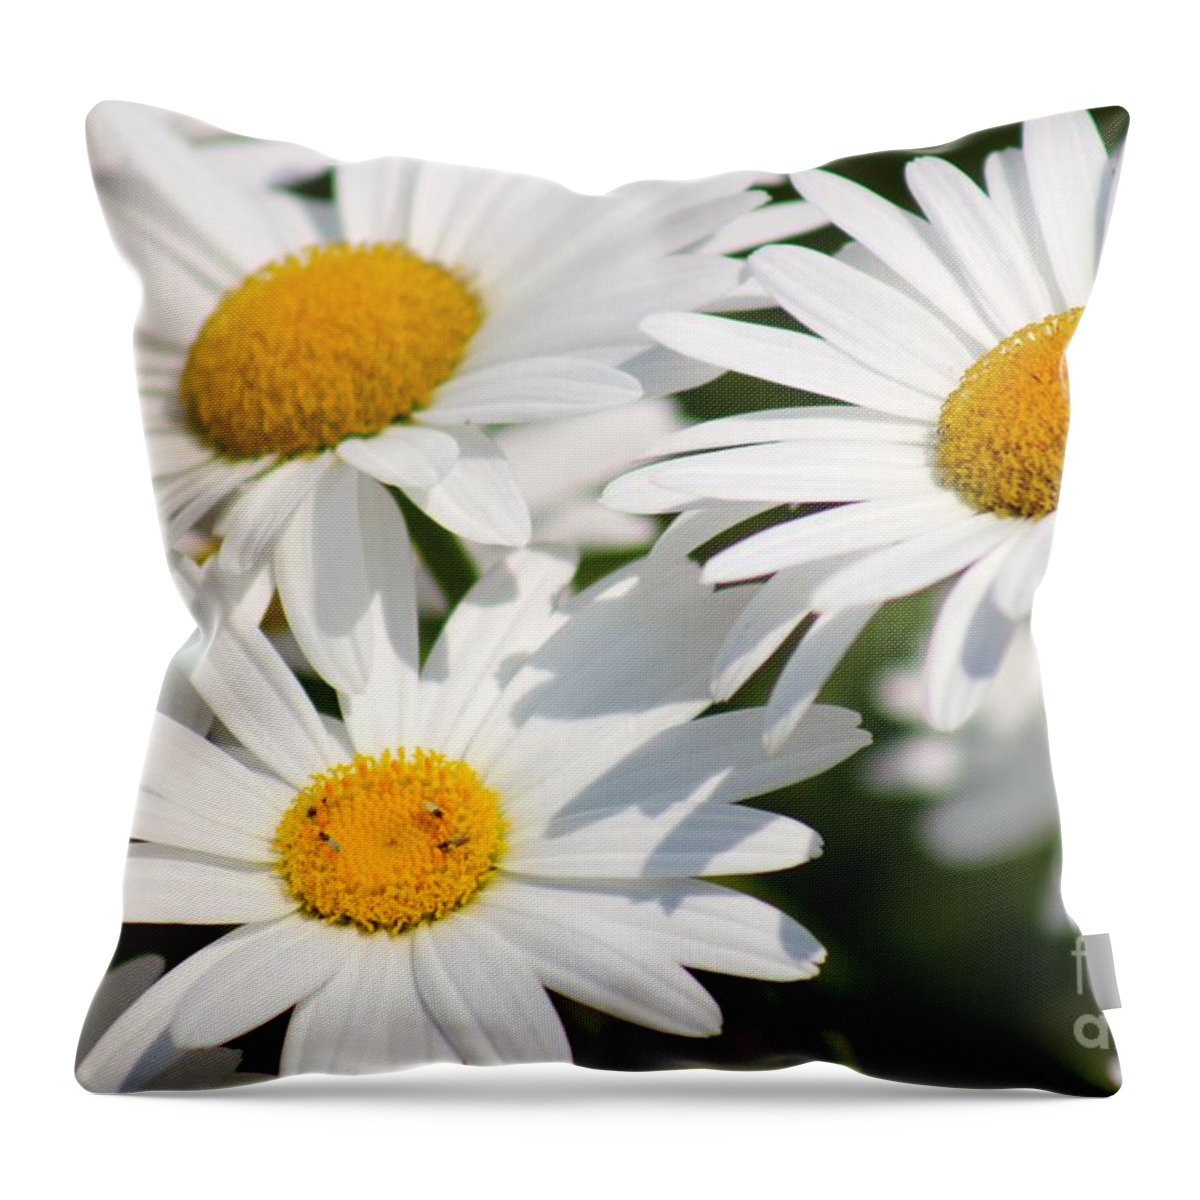 Yellow Throw Pillow featuring the photograph Nature's Beauty 55 by Deena Withycombe